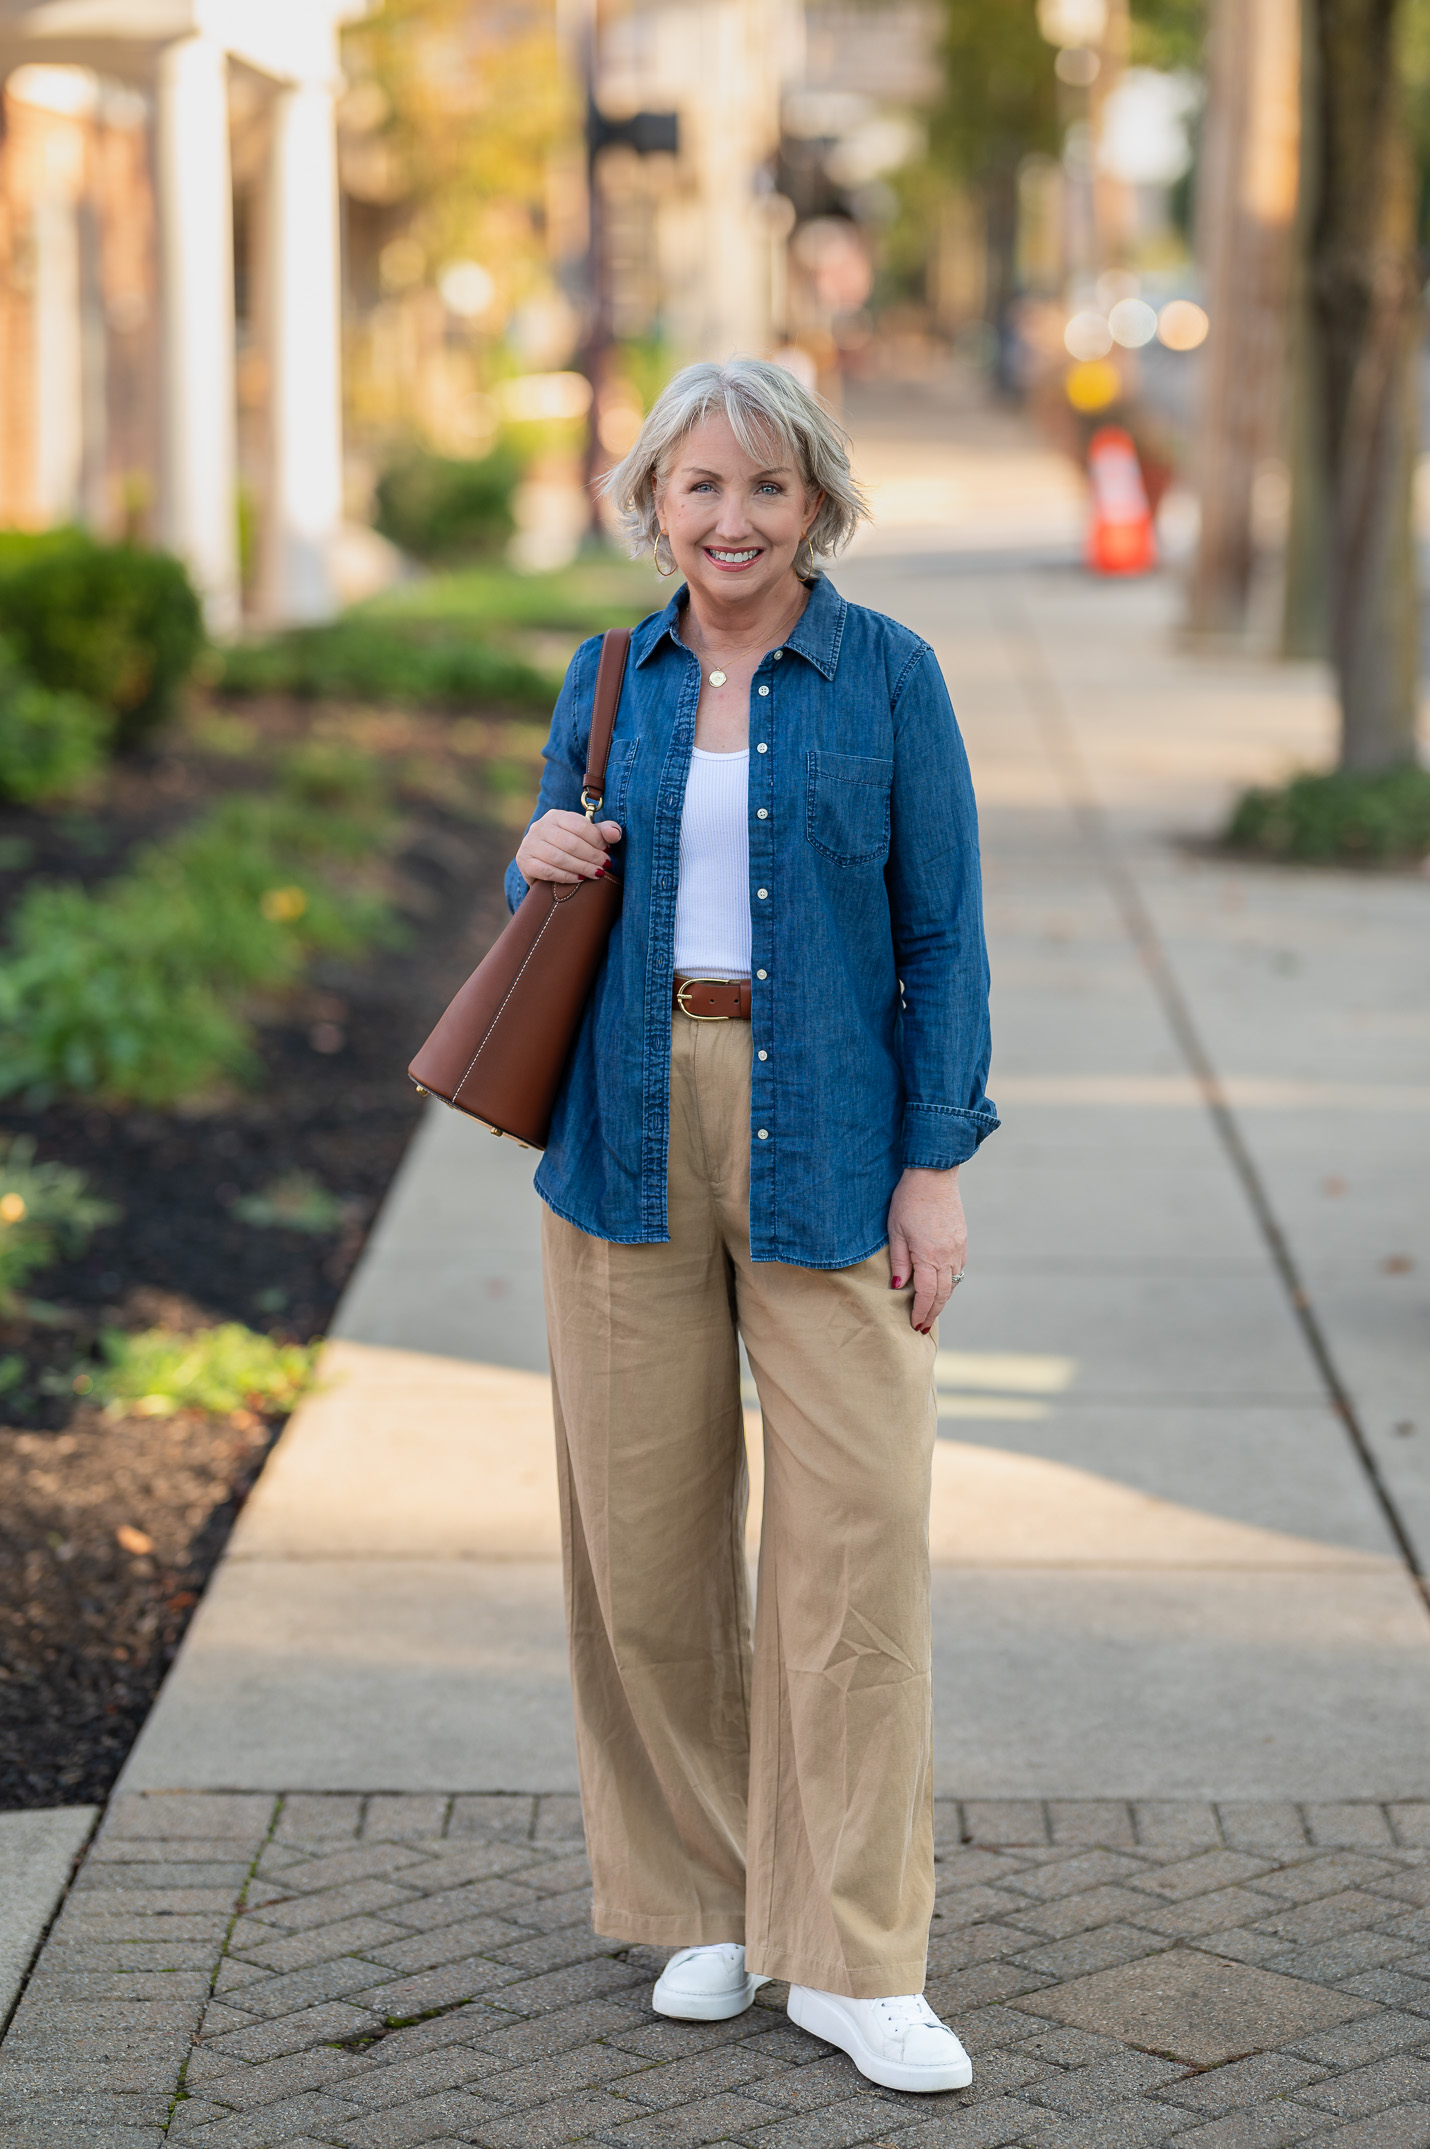 Transitioning Summer Wide-Leg Pants Into Fall - Economy of Style